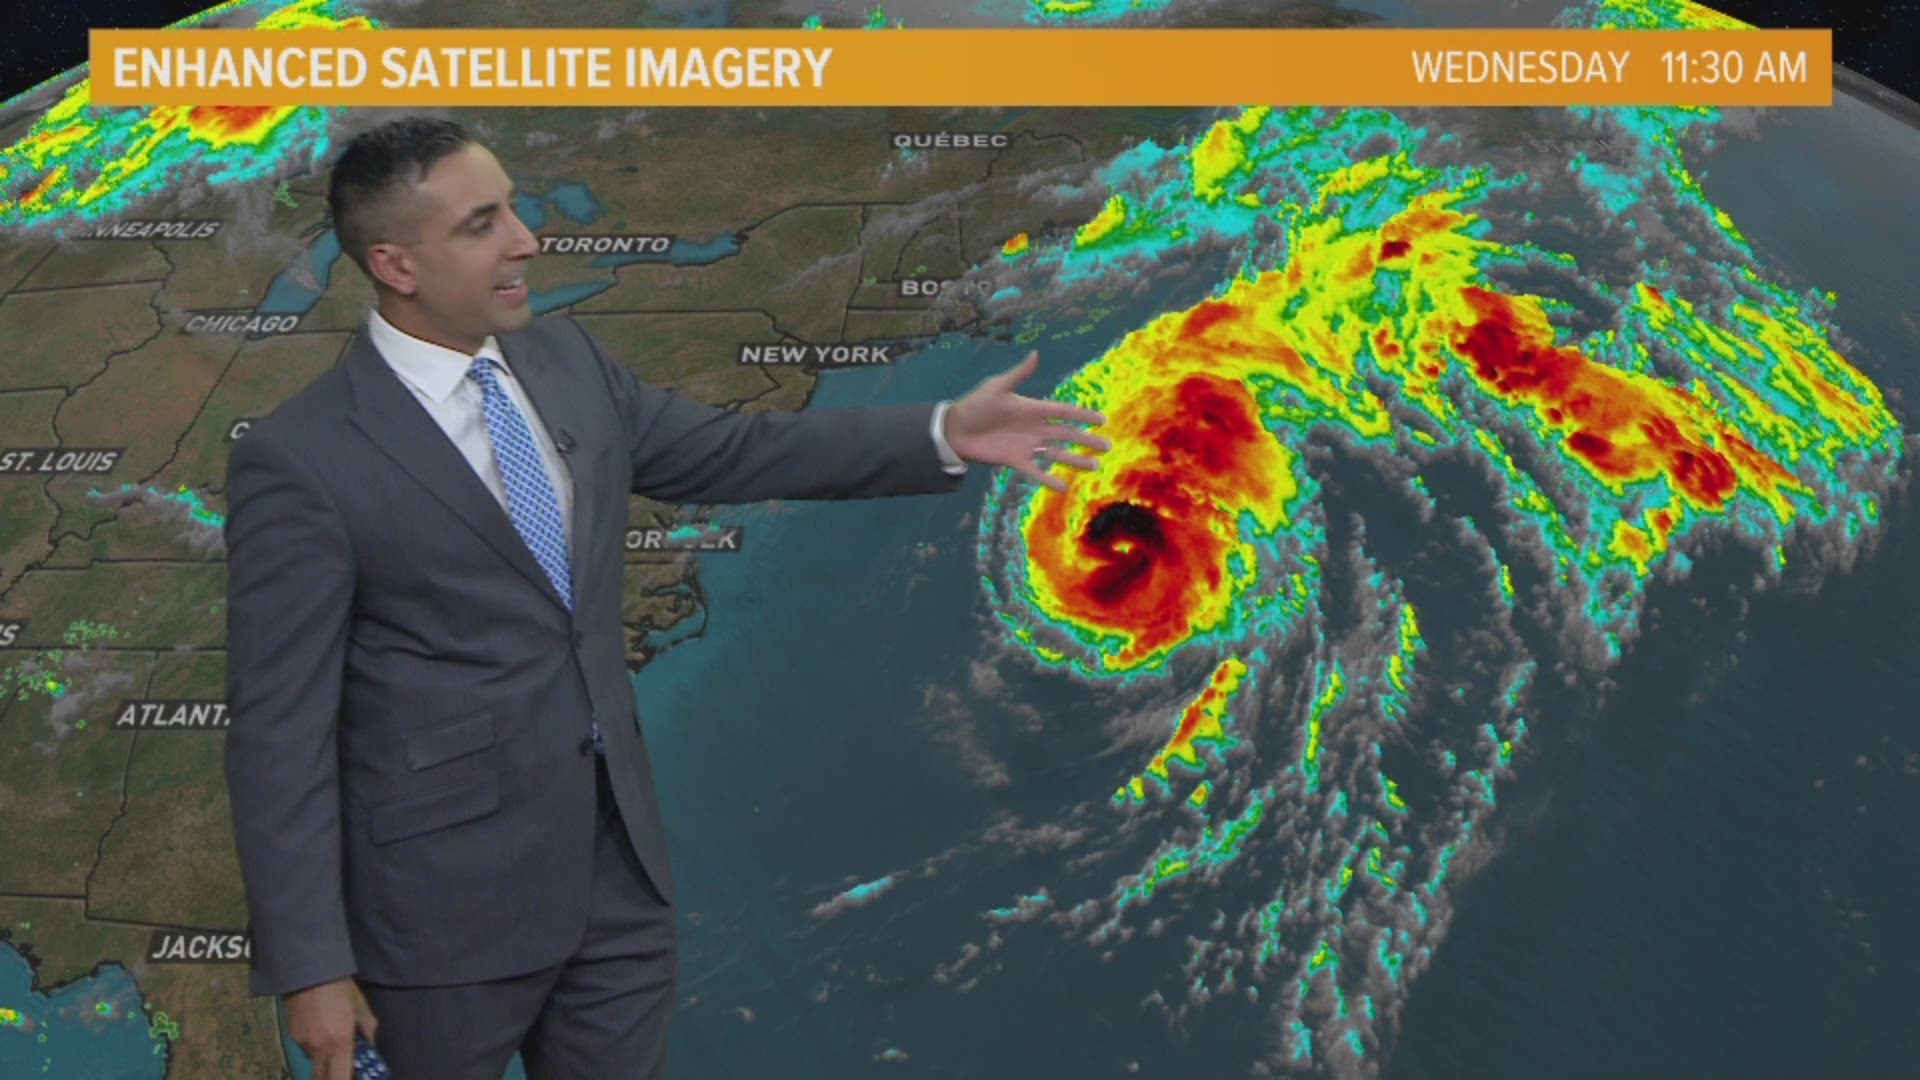 13News Now meteorologist Tim Pandajis has the latest on Hurricane Chris and a possible re-emergence of Tropical Storm Beryl